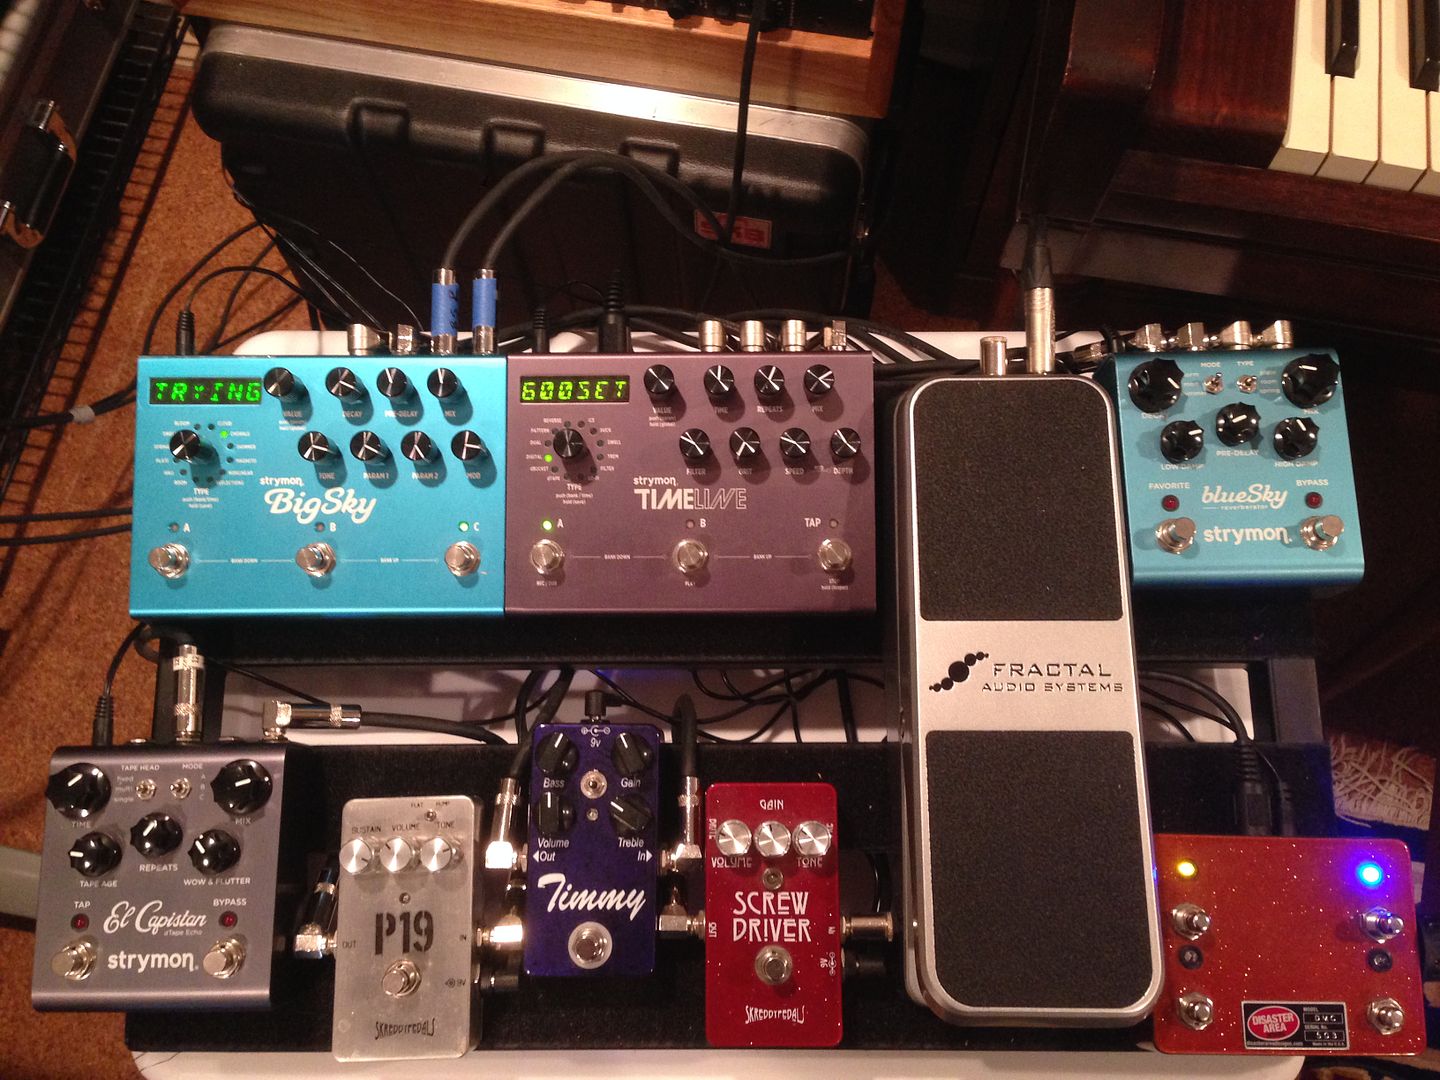 Show Your Pedalboard Thread #40-49 And Following | Page 406 | The Gear Page